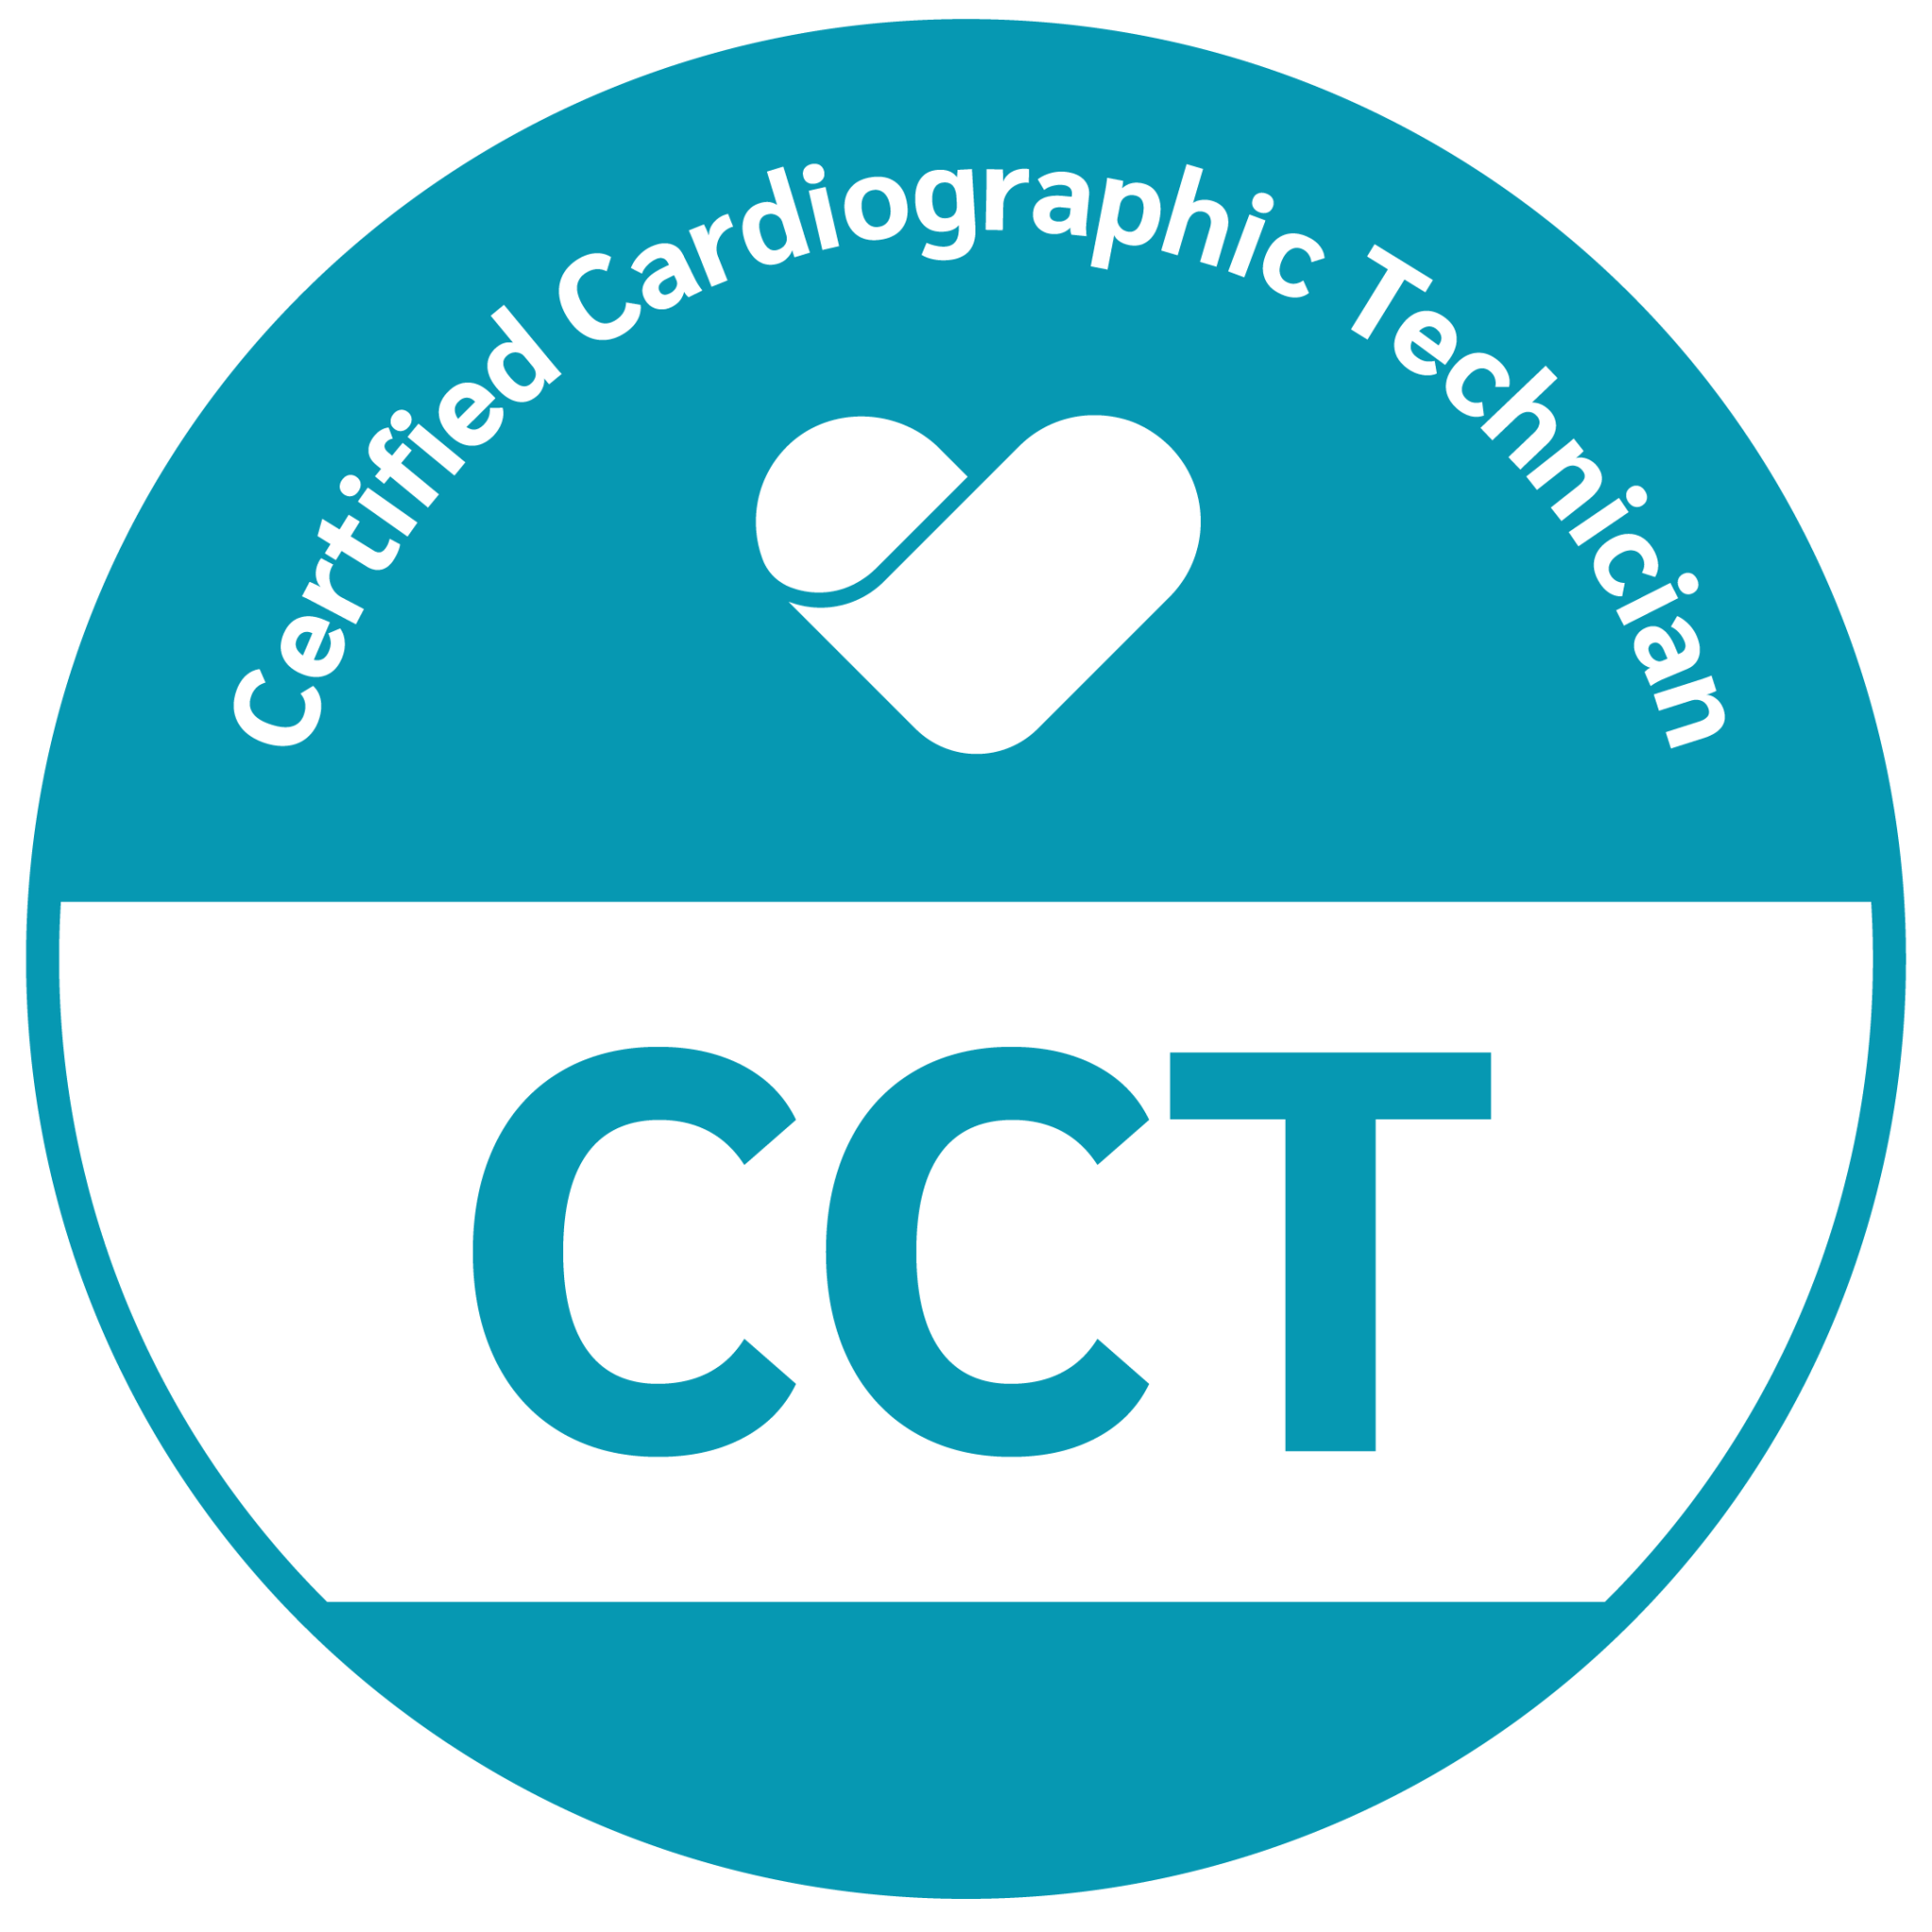 Certified Cardiographic Technician (CCT) exam CCI Credentialing